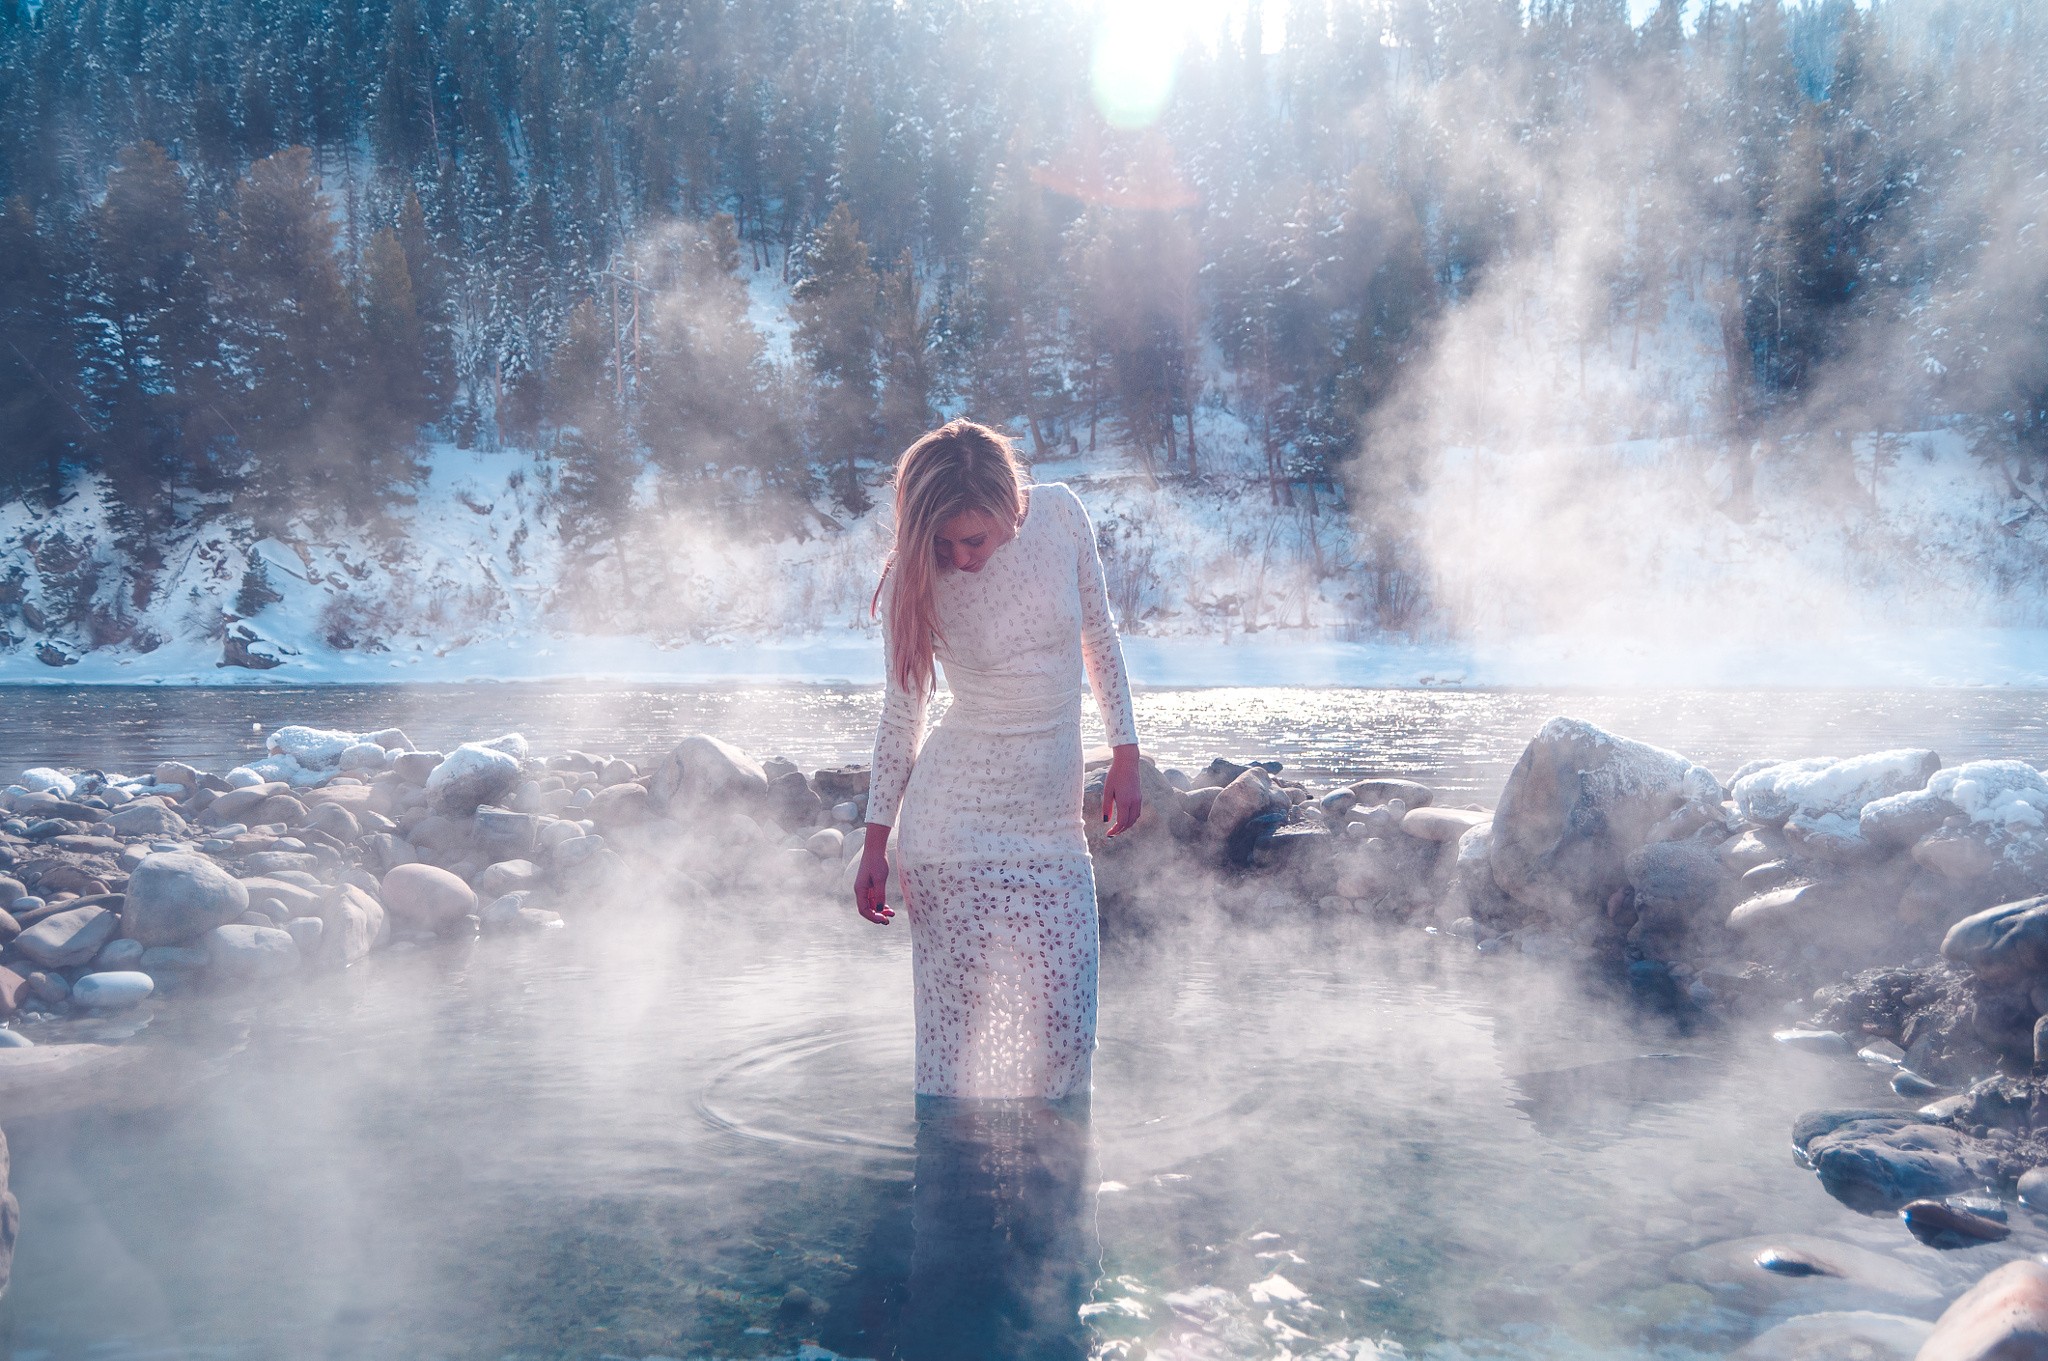 People 2048x1361 women mist water cold outdoors white clothing women outdoors looking away blonde in water snow trees standing standing in water